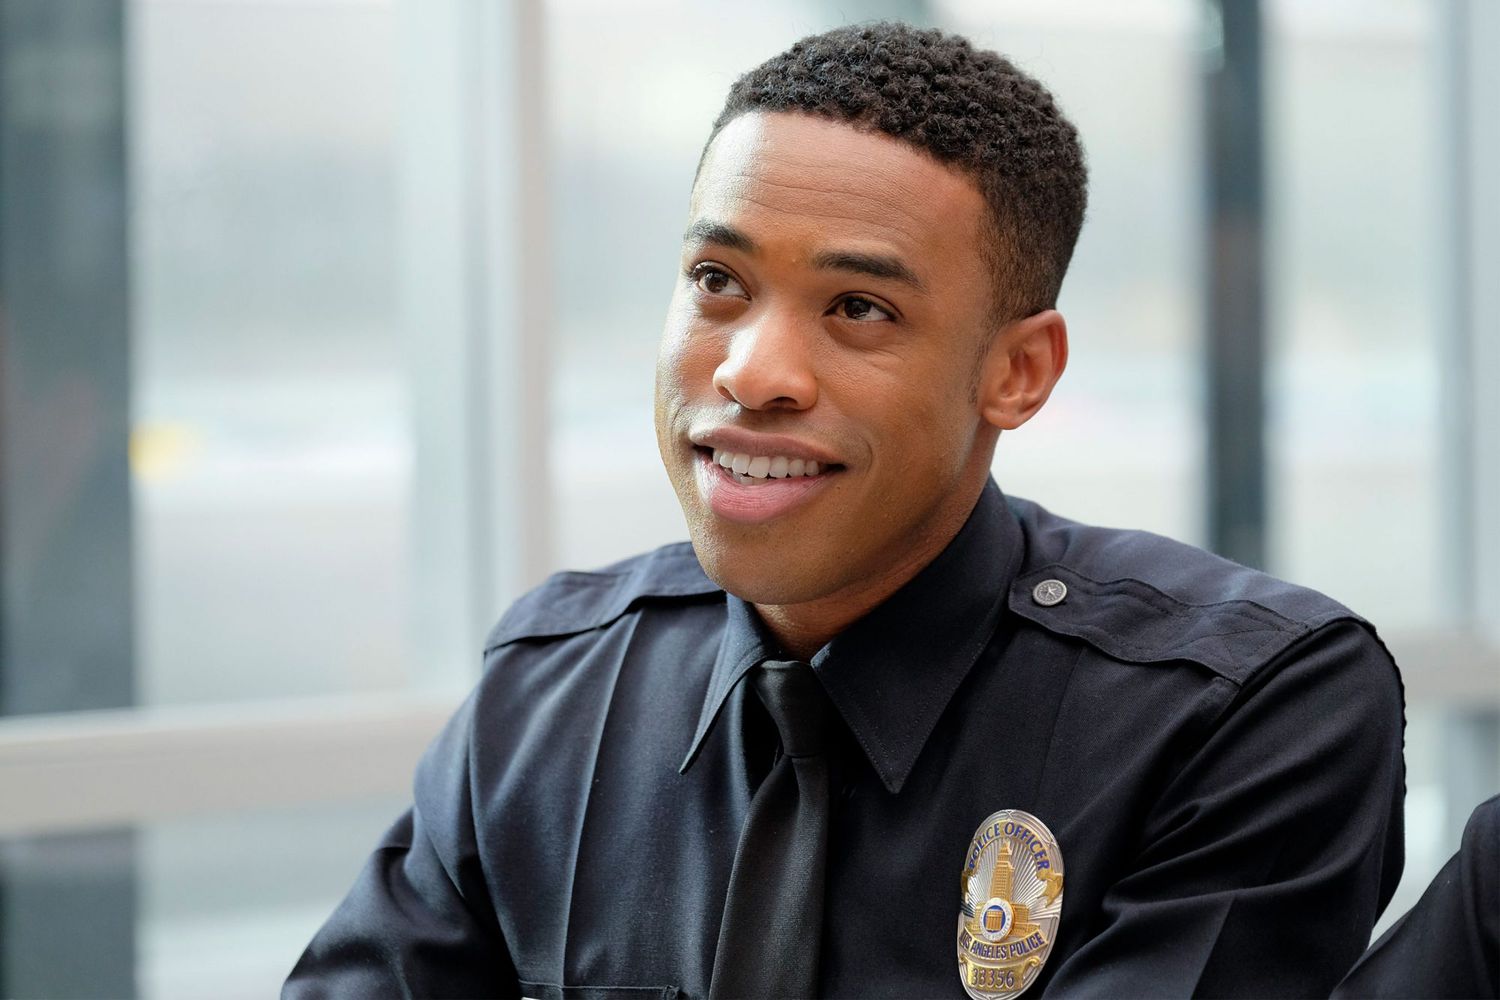 The Rookie: Titus Makin on what's ahead for Jackson on ABC drama | EW.com